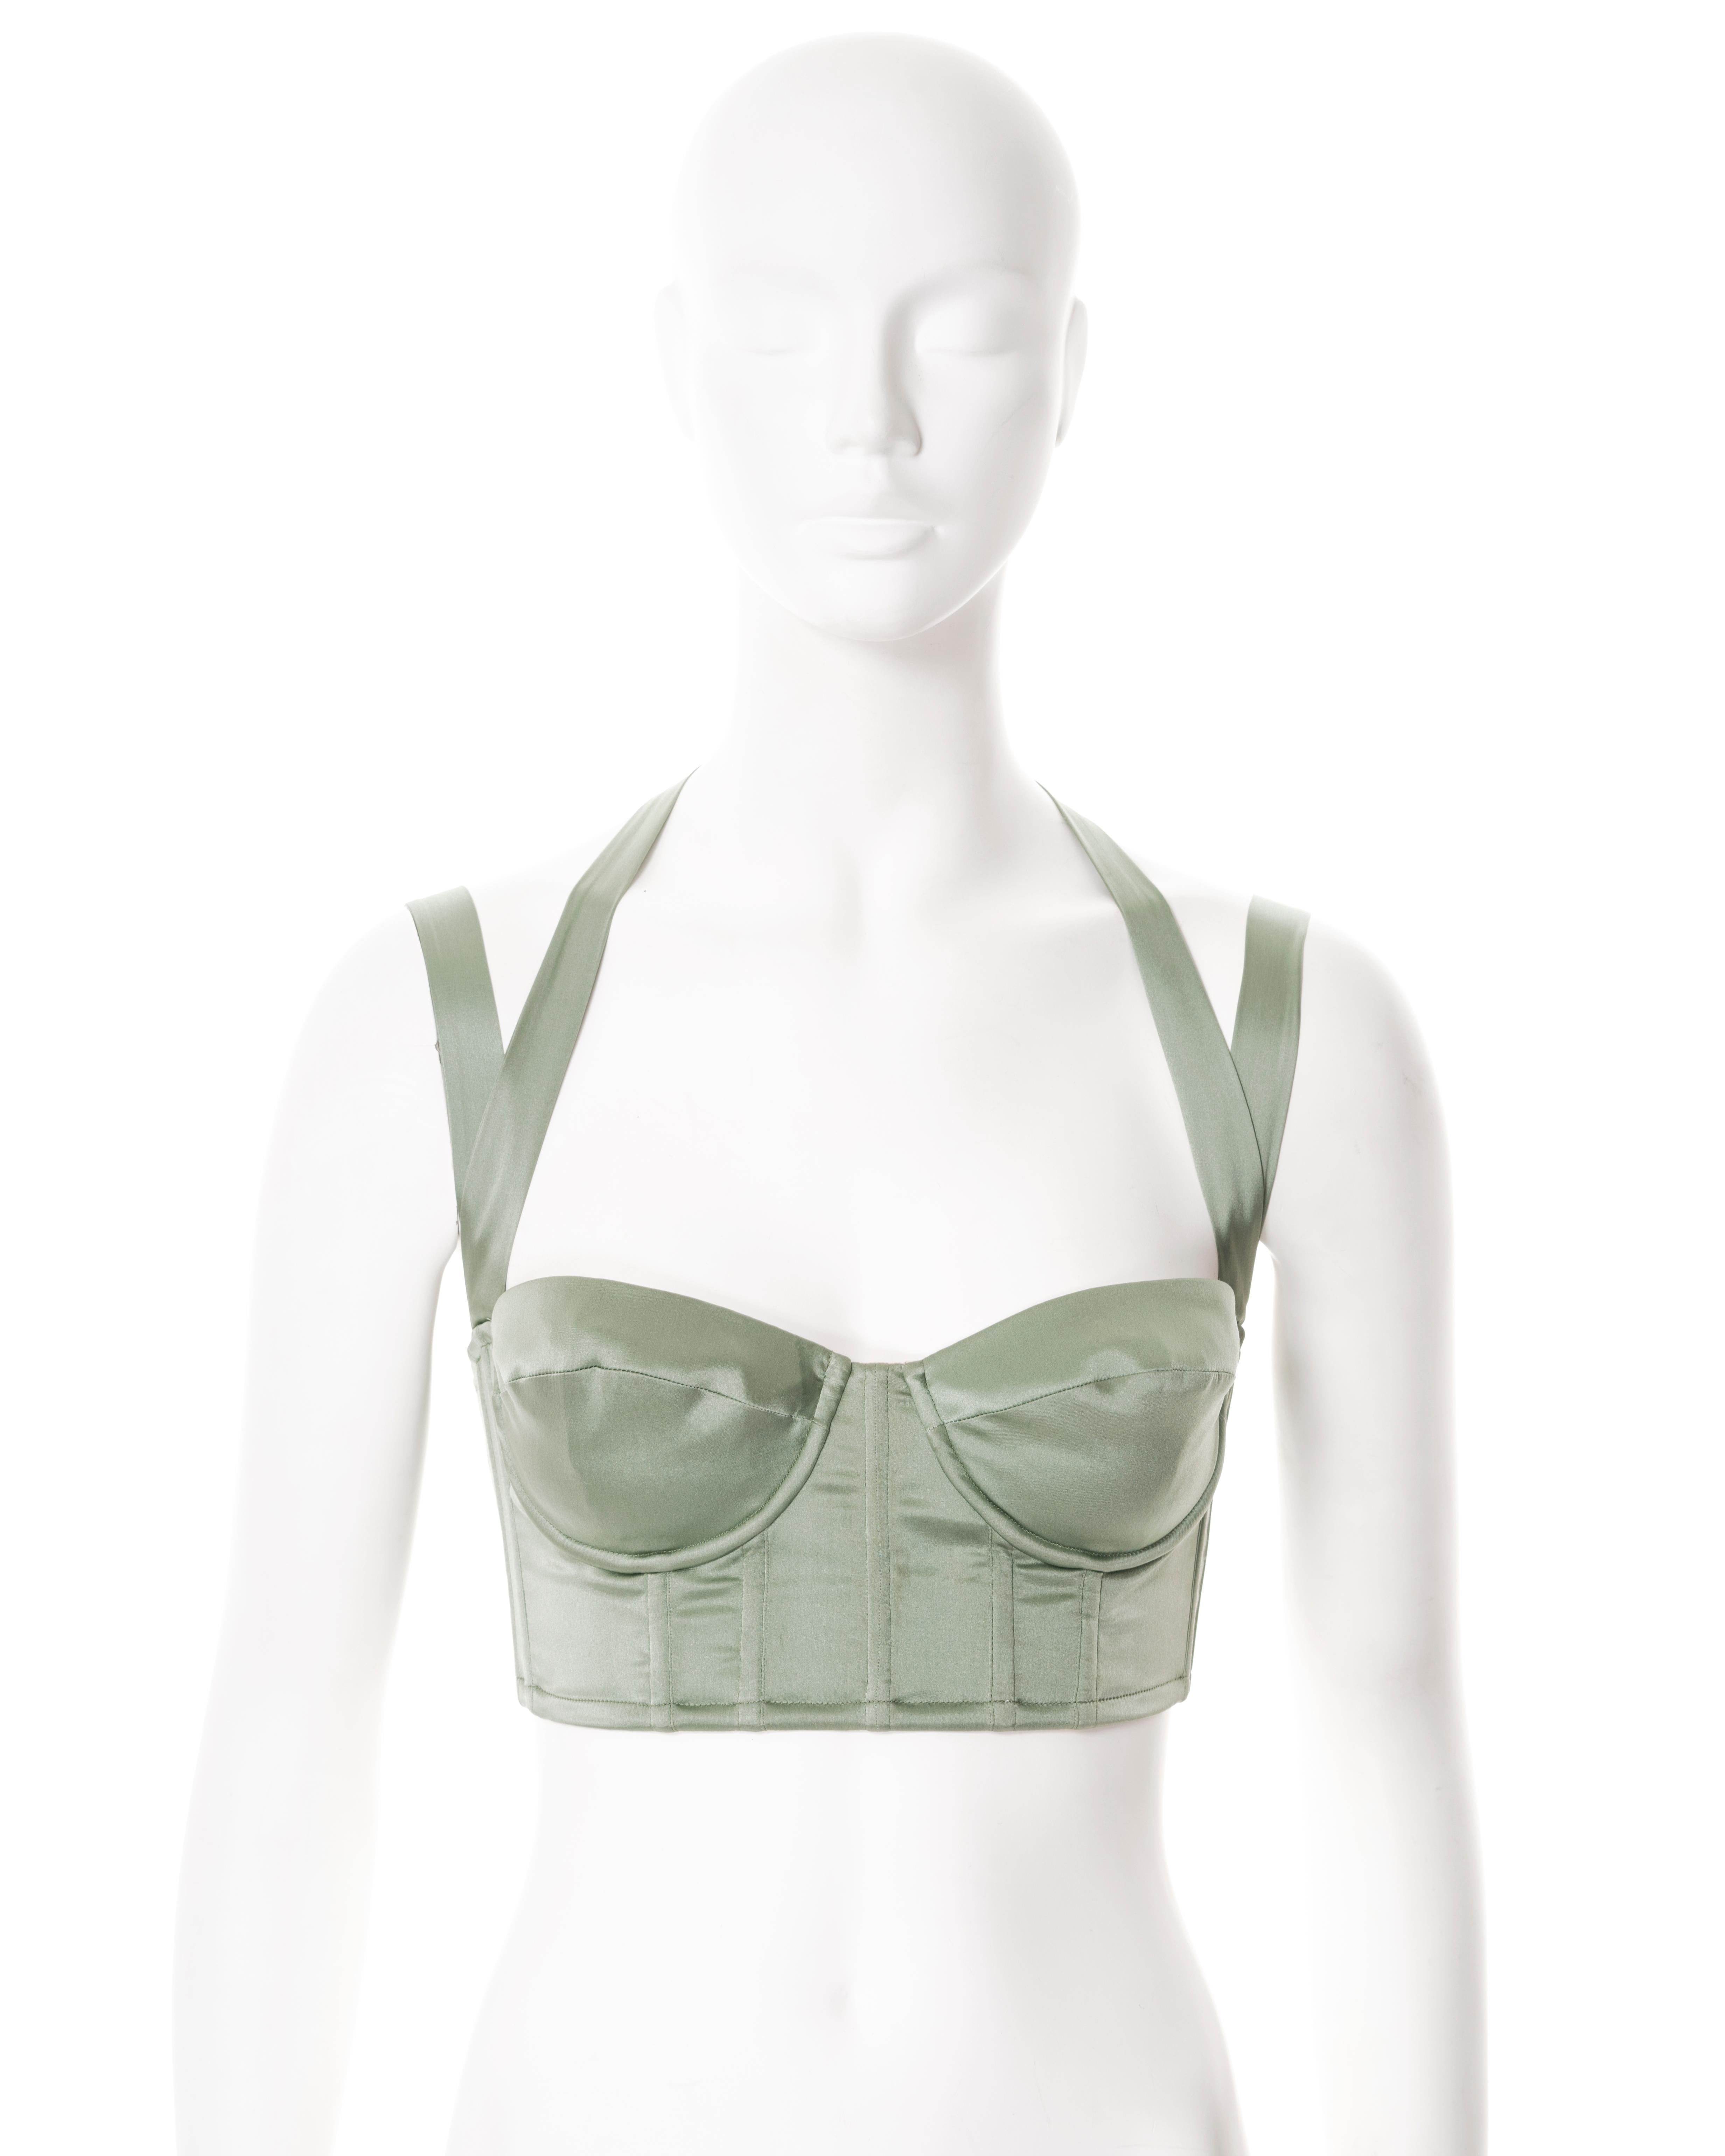 ▪ Roberto Cavalli cropped bustier / corset 
▪ Sold by One of a Kind Archive
▪ Constructed from sage green silk 
▪ Halter-neck ties with chain and feather adornments 
▪ Lace-up fastening
▪ Size Medium
▪ Made in Italy

All photographs in this listing